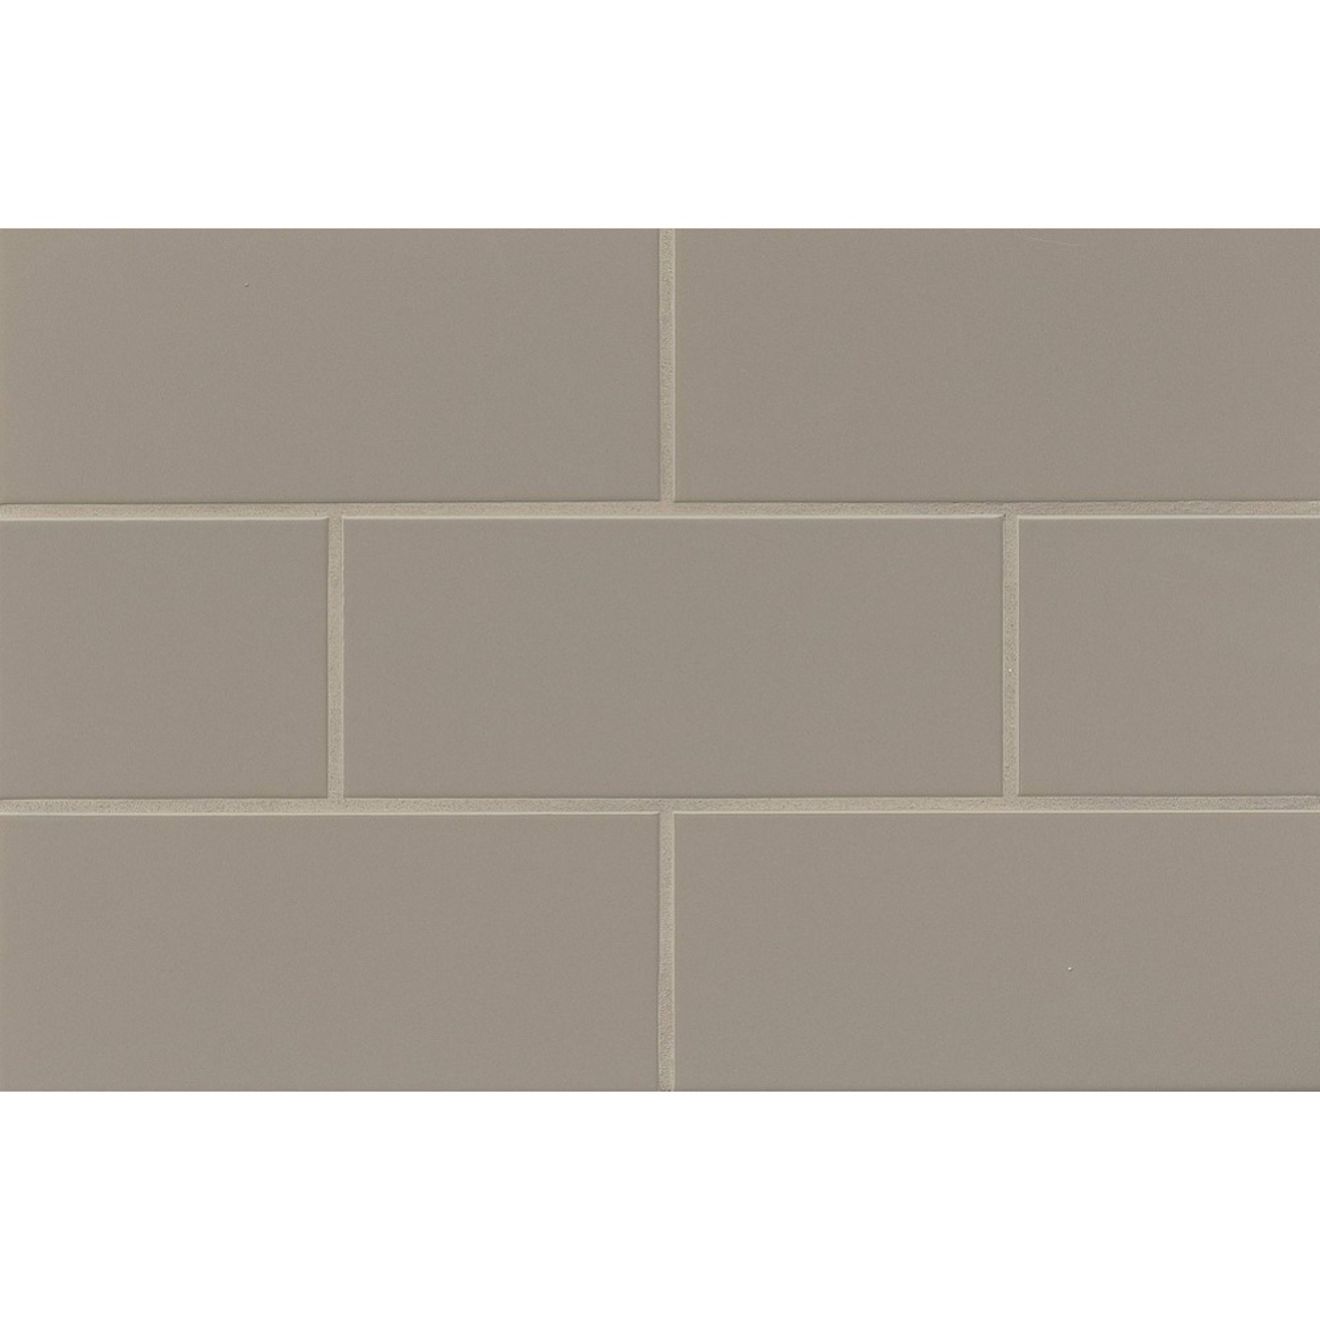 Bedrosians - Traditions 4" x 10" Ceramic Wall Tile - Gloss Taupe